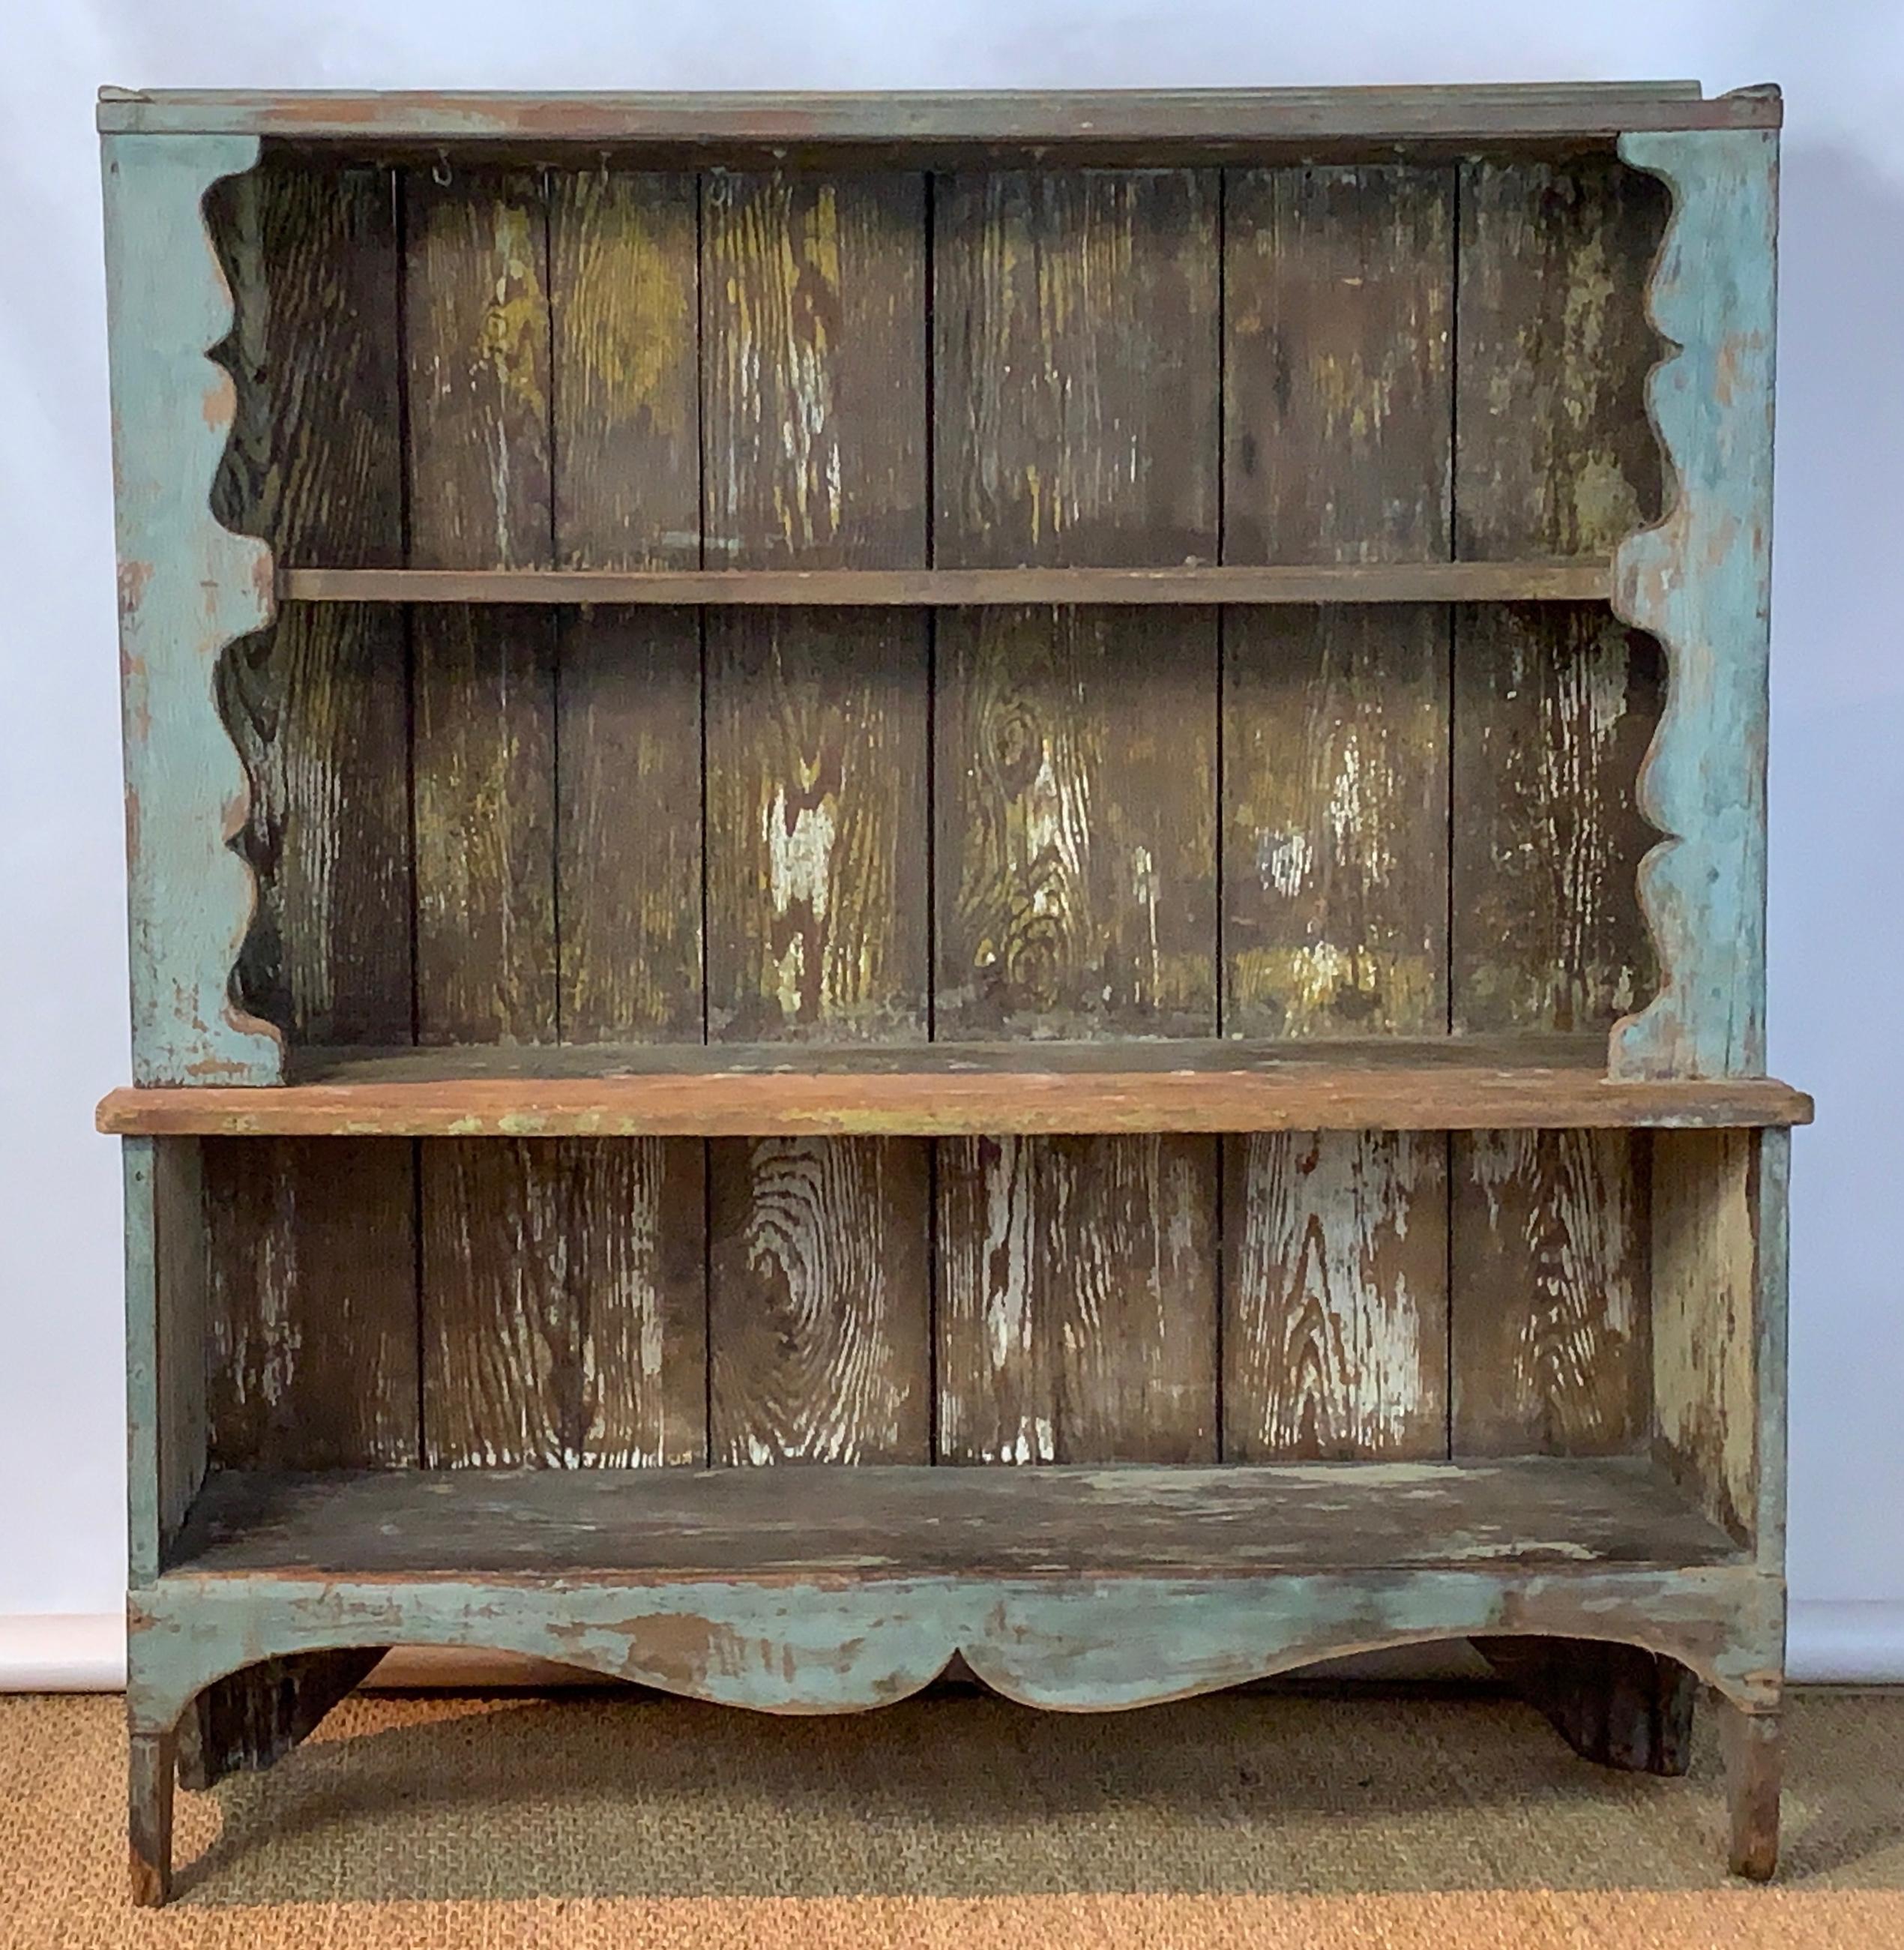 A very charming mid-19th century American painted pine open shelf cupboard with original robin's egg blue paint and wonderful patina overall. The top two shelves are fitted with early brass cup hooks.